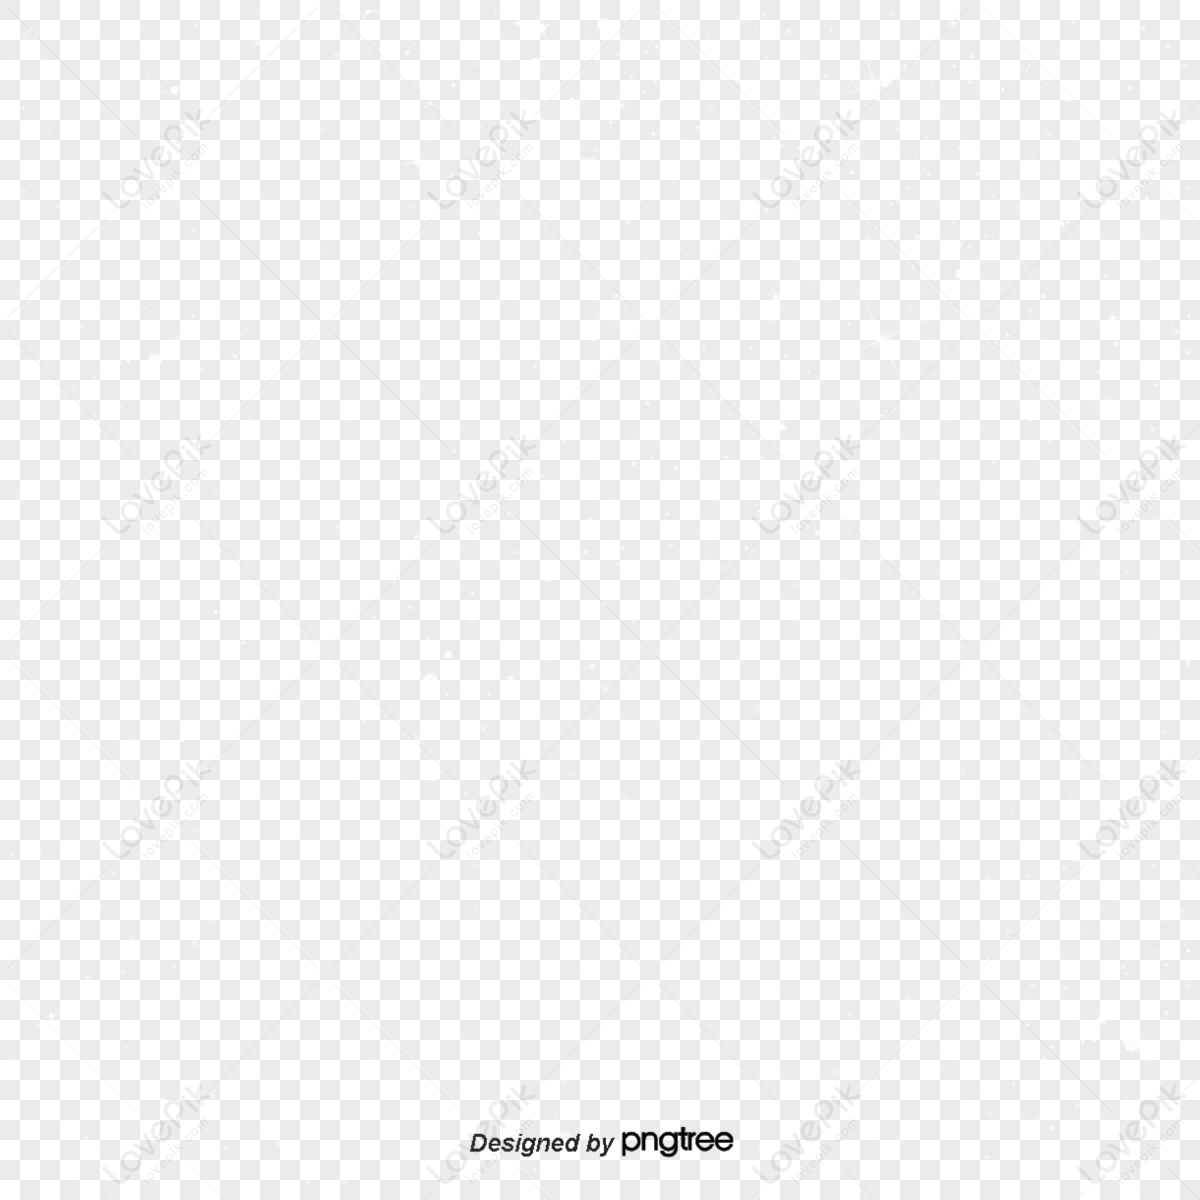 Star Pictures PNG Images With Transparent Background | Free Download On ...